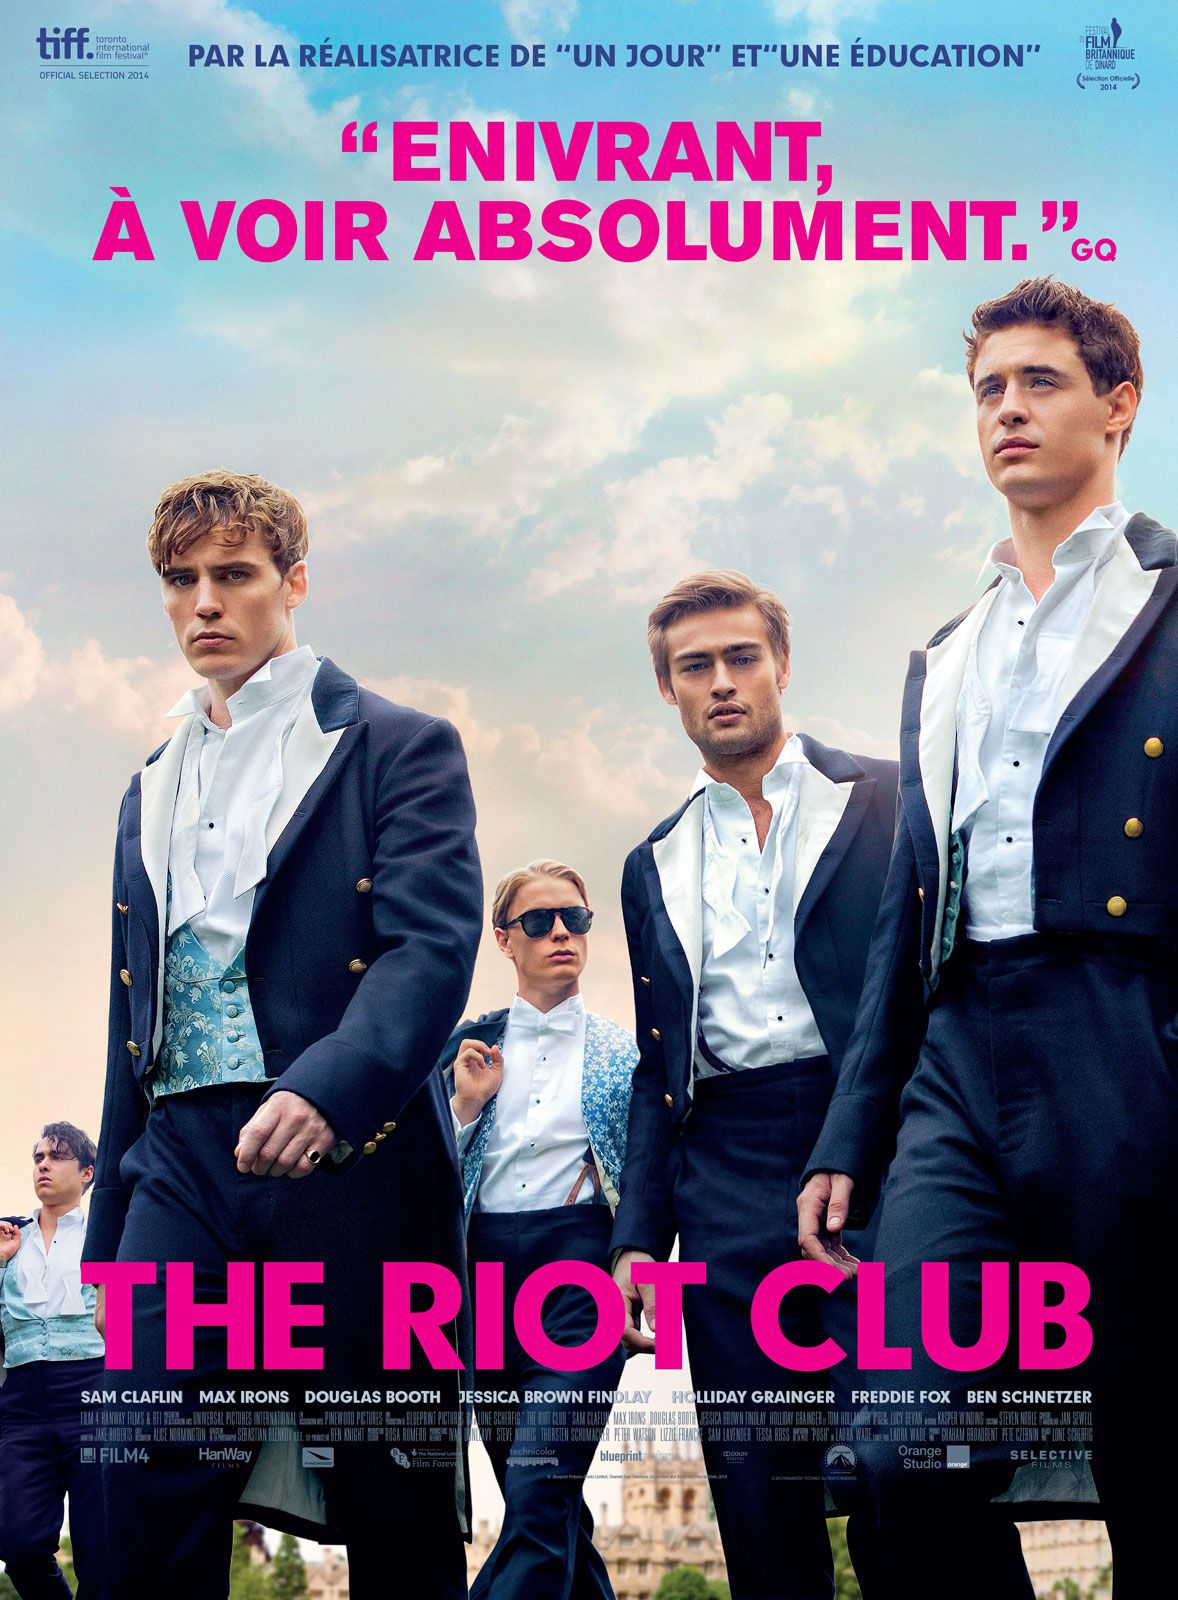 The Riot Club - Film (2014) streaming VF gratuit complet